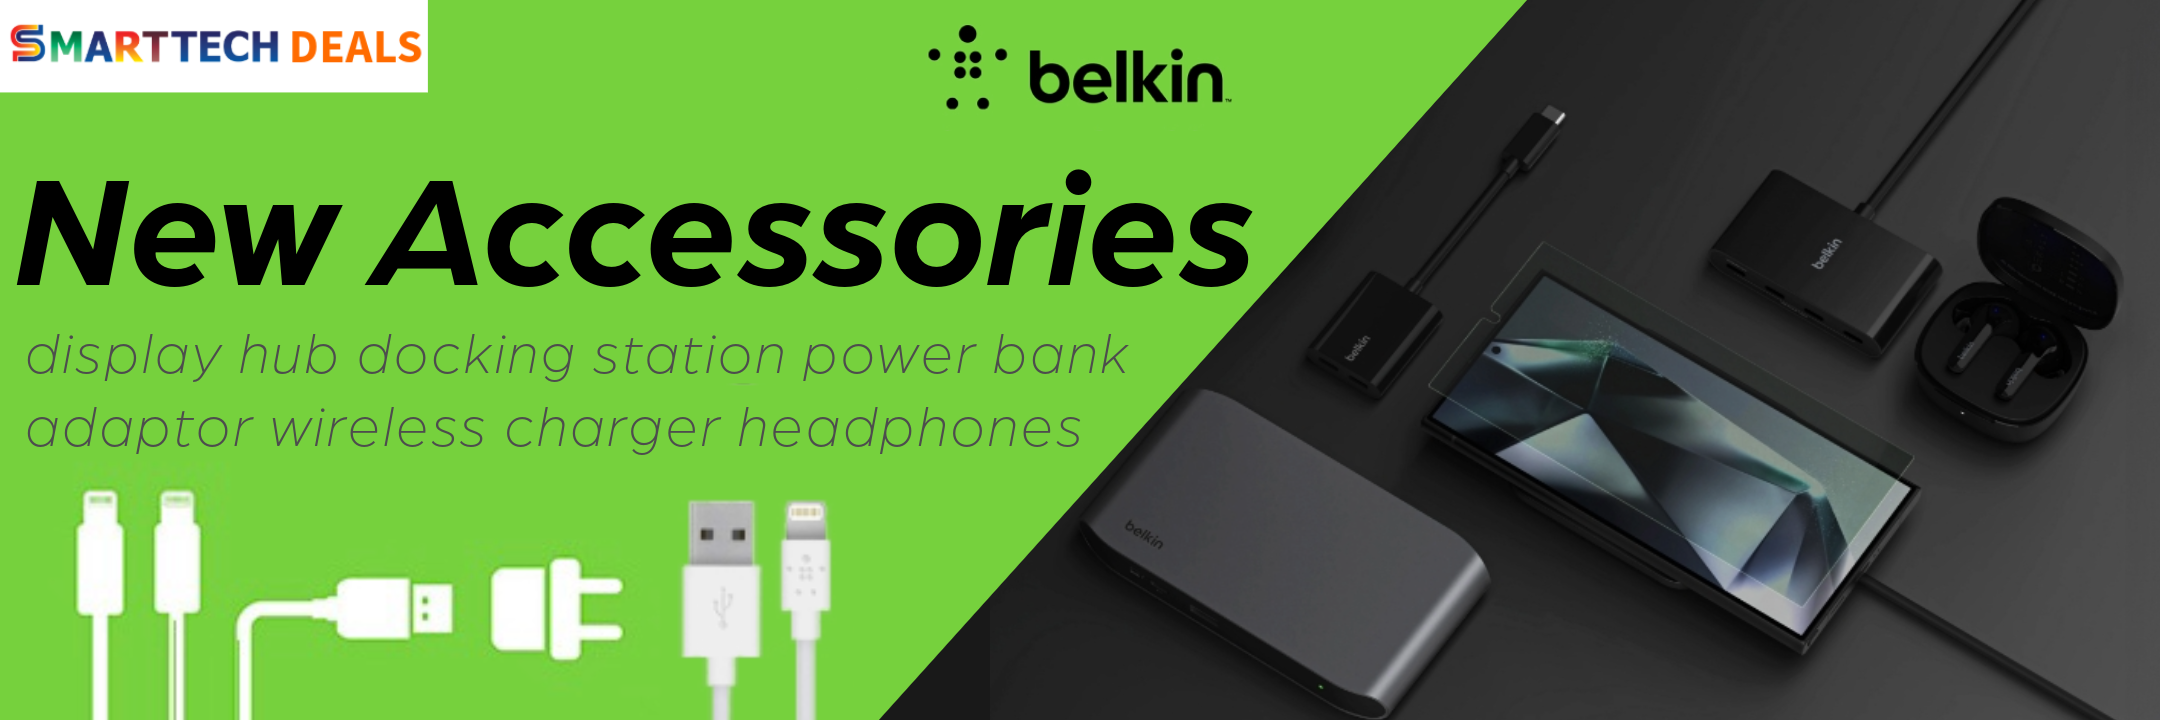 New Electronic Belkin Accessories are available at SmartTech Deals for great prices. Display hubs, docking stations, power banks, adaptors, wireless chargers, headphones